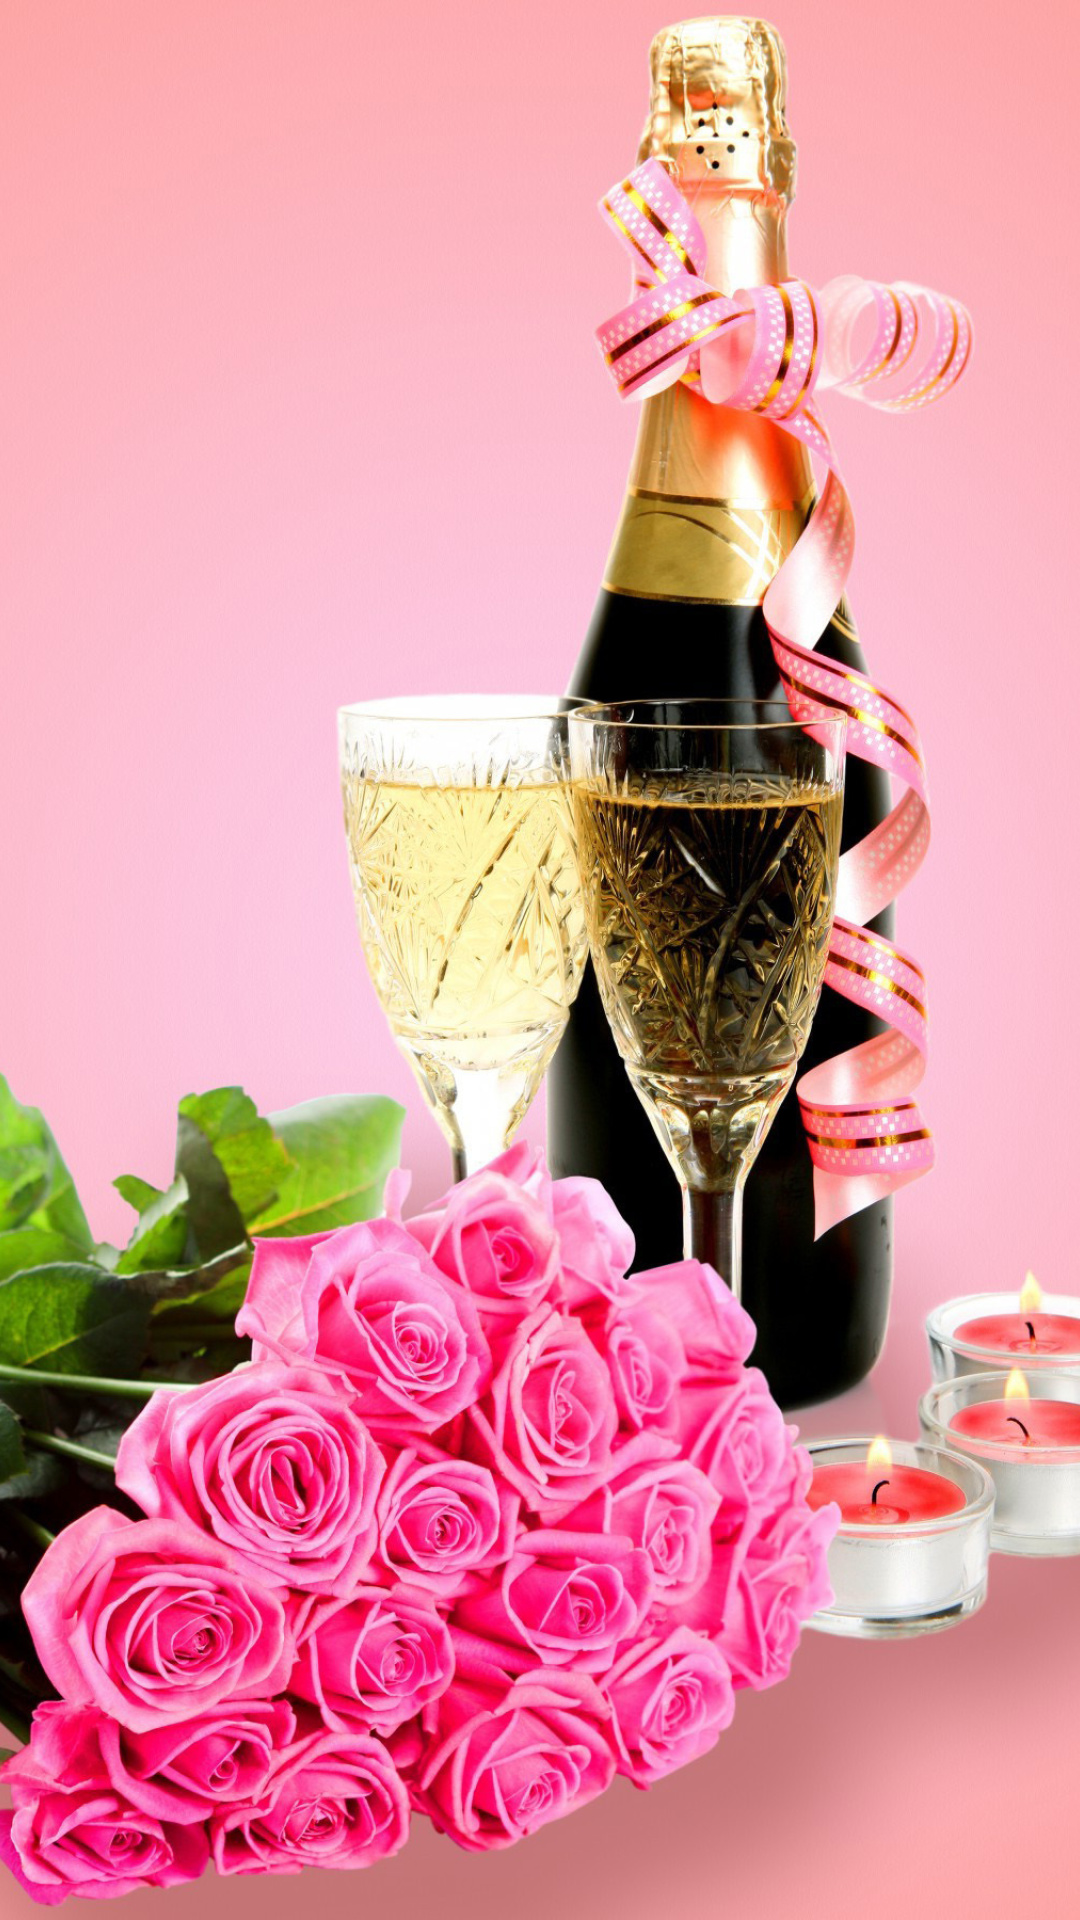 Clipart Roses Bouquet and Champagne screenshot #1 1080x1920